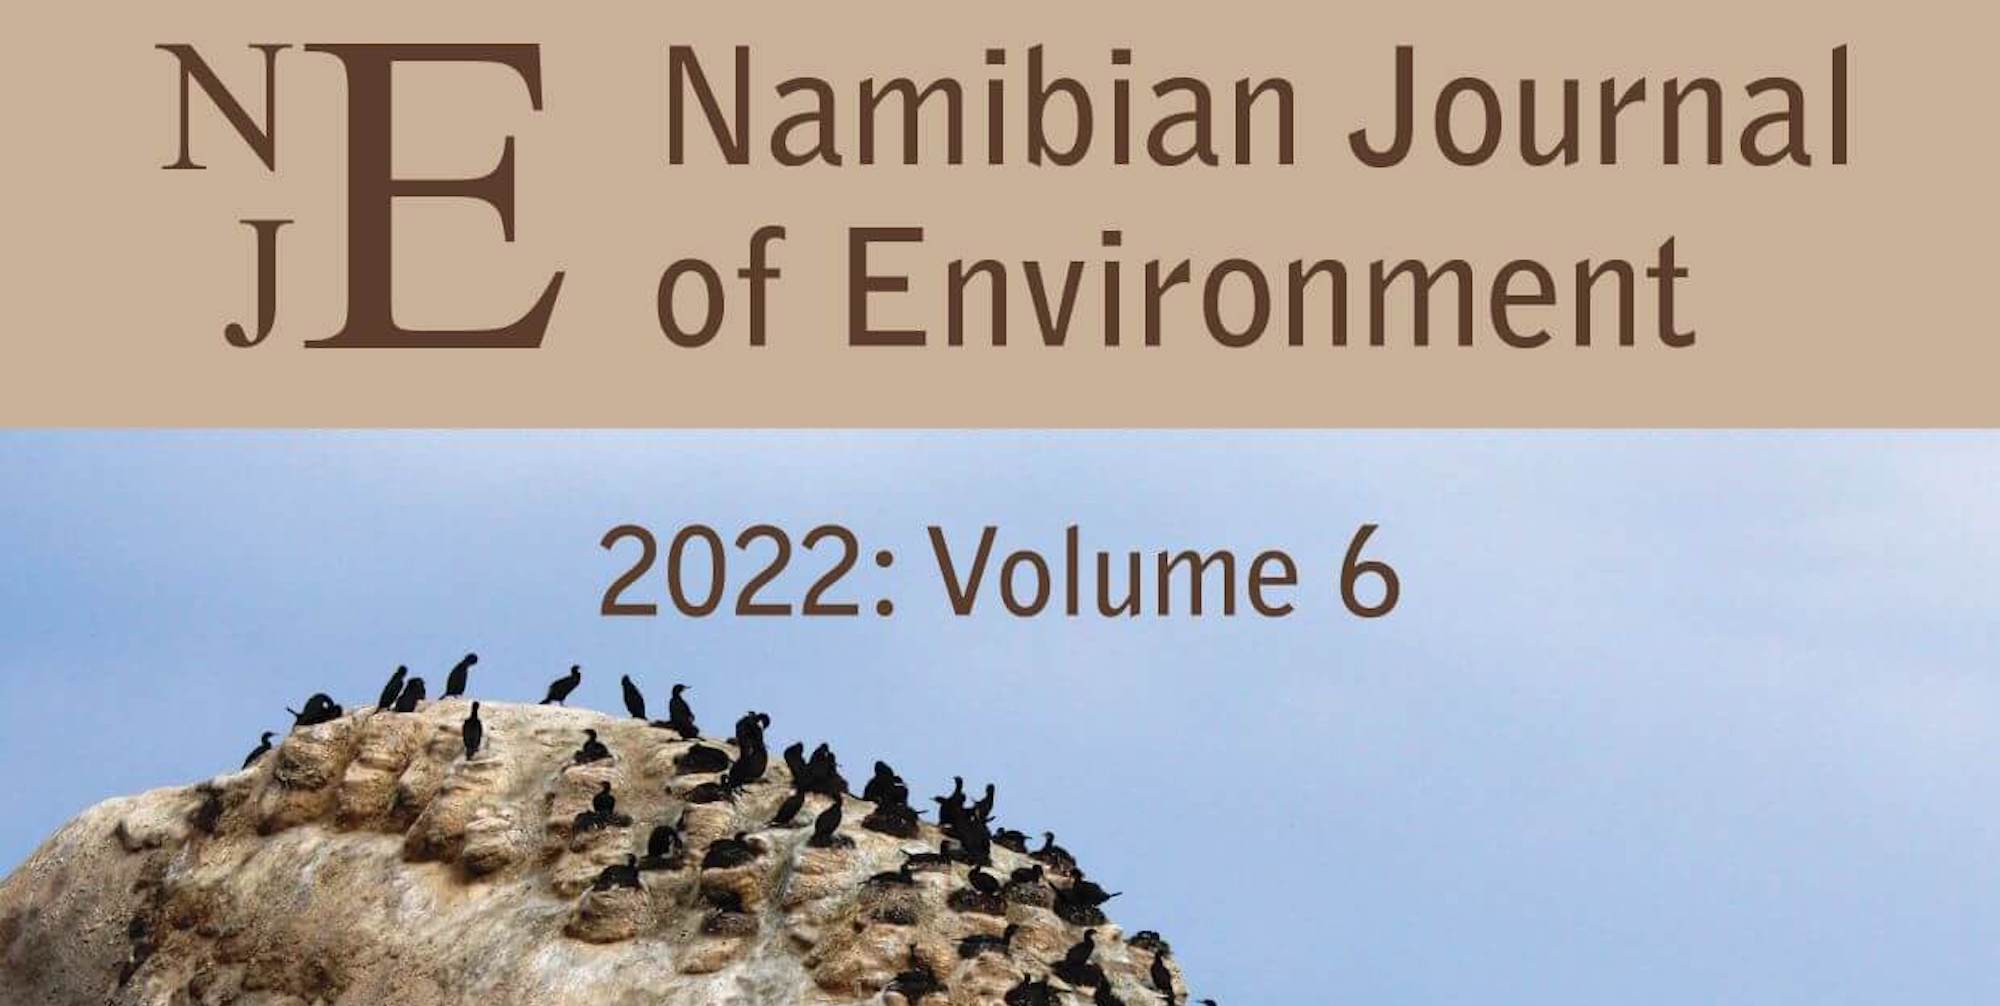 The front cover of NJE volume 6, 2022 edition.